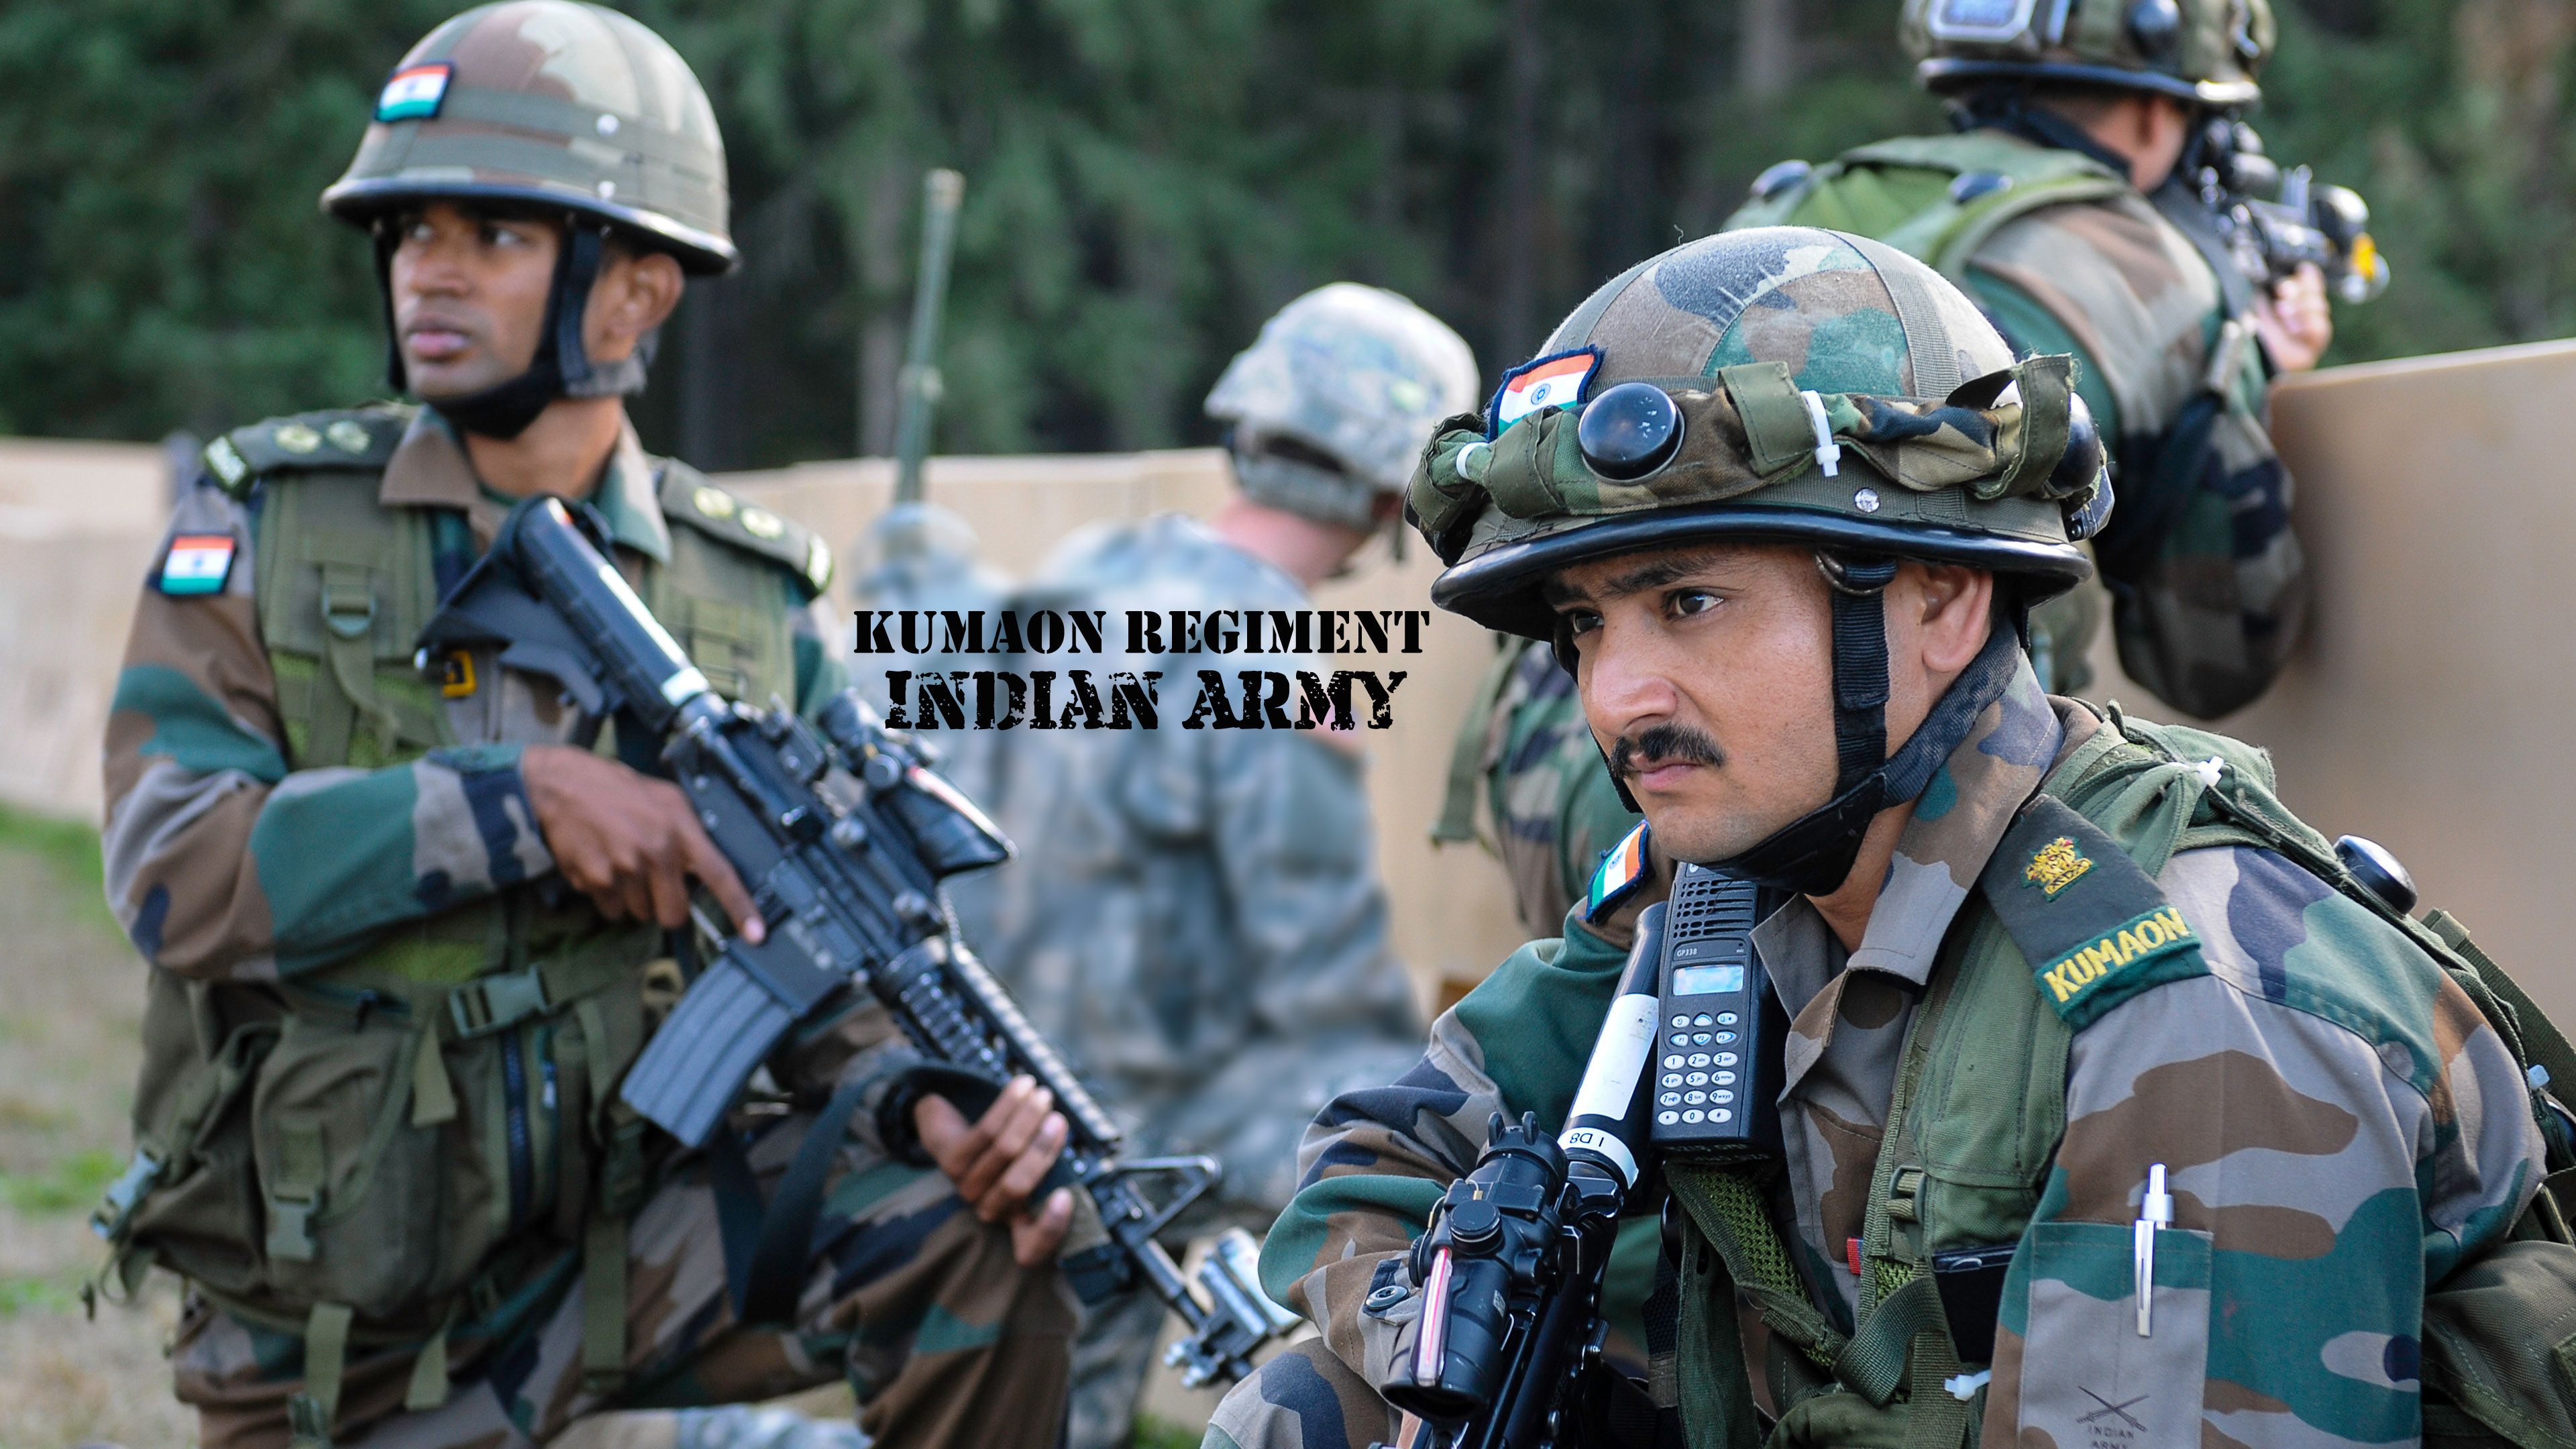 Indian Army Wallpaper For Mobile Phone - Indian Army Kumaon Regiment , HD Wallpaper & Backgrounds